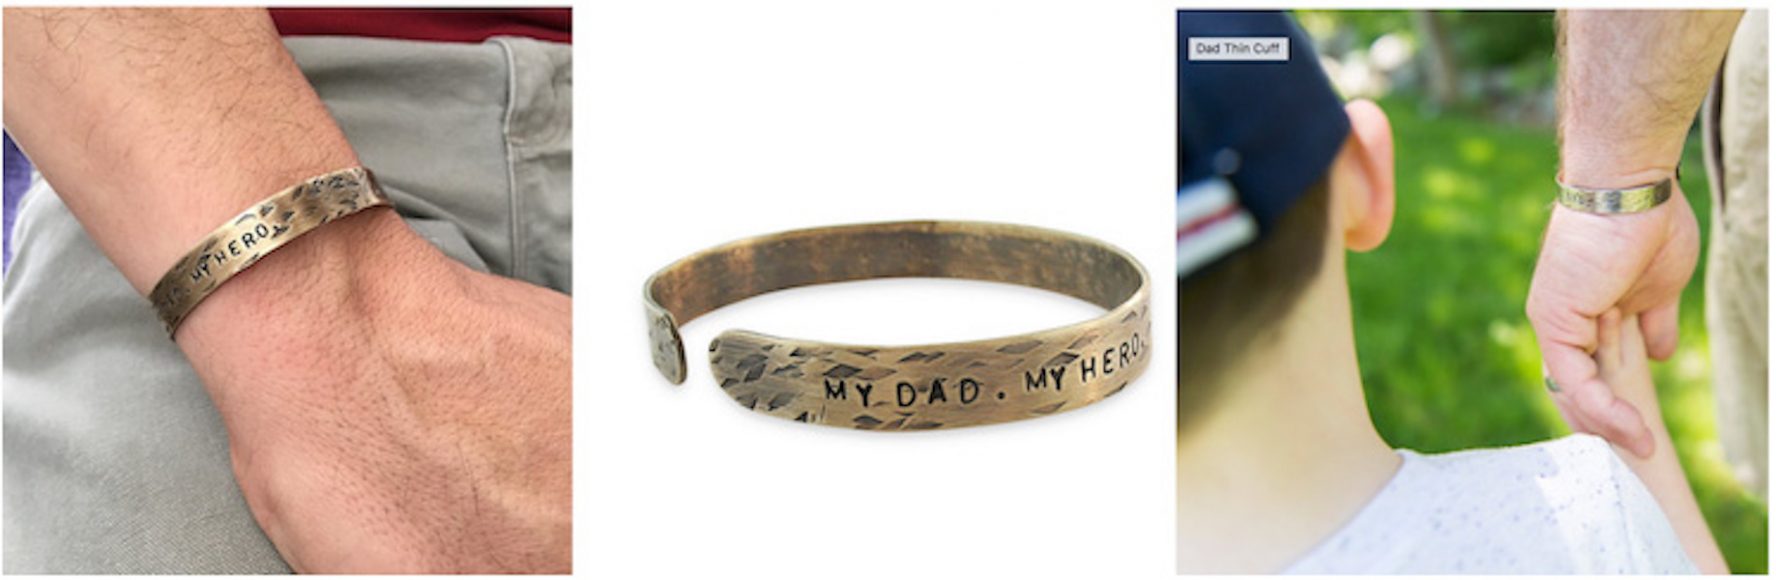 Hero Dad Cuff Link, $46. Photograph courtesy Isabelle Grace Jewelry.